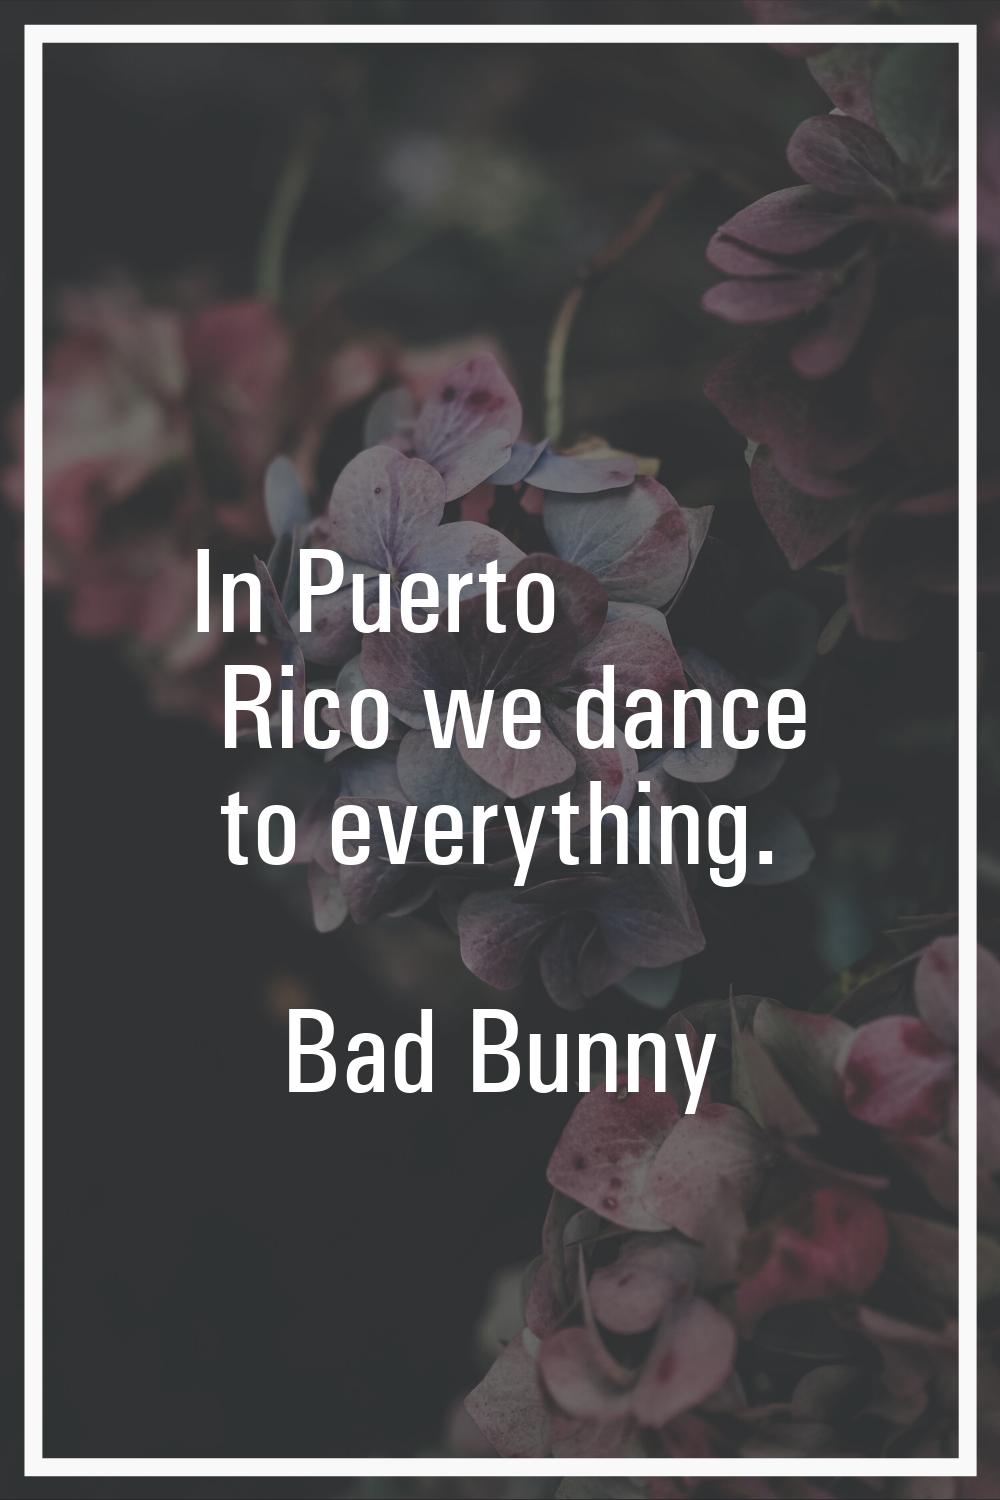 In Puerto Rico we dance to everything.